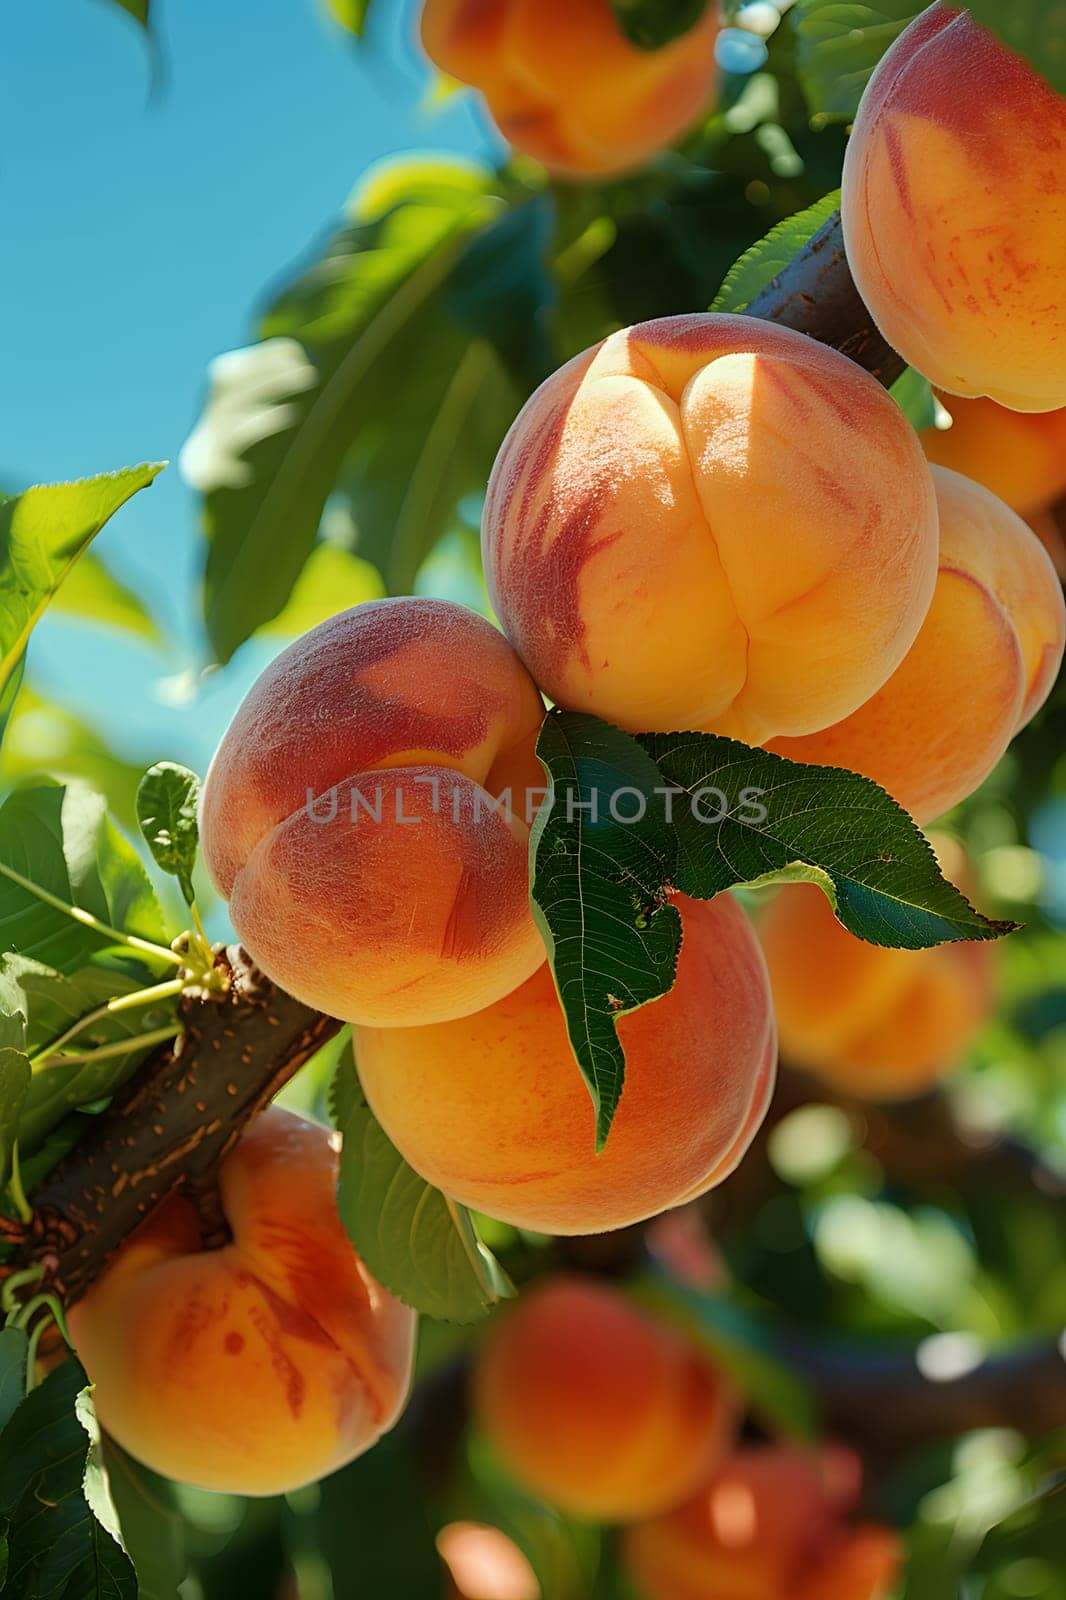 A cluster of ripe peaches dangle from a flowering peach tree branch. The vibrant petals and green leaves create a colorful contrast against the orange fruits